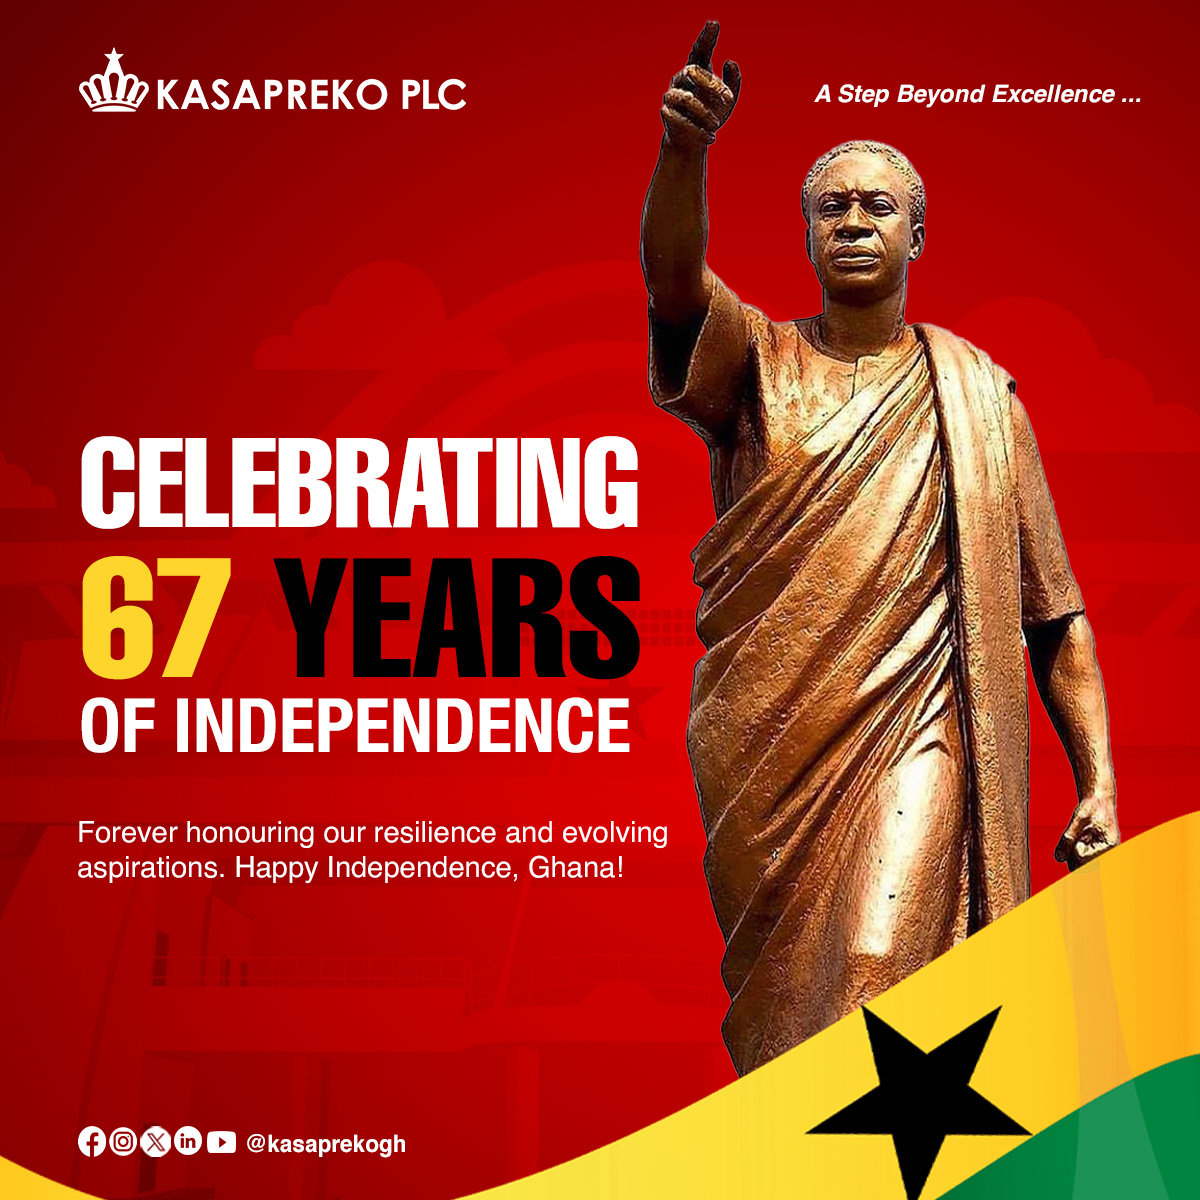 Happy Independence Day, Ghana! Celebrating 67 years of resilience, unity, and progress. Let's Raise The Flag of Ghana & toast to a brighter future ahead! #ghana #heritagemonth #IndependenceDay #kasapreko #GhanaNews #success #freedom